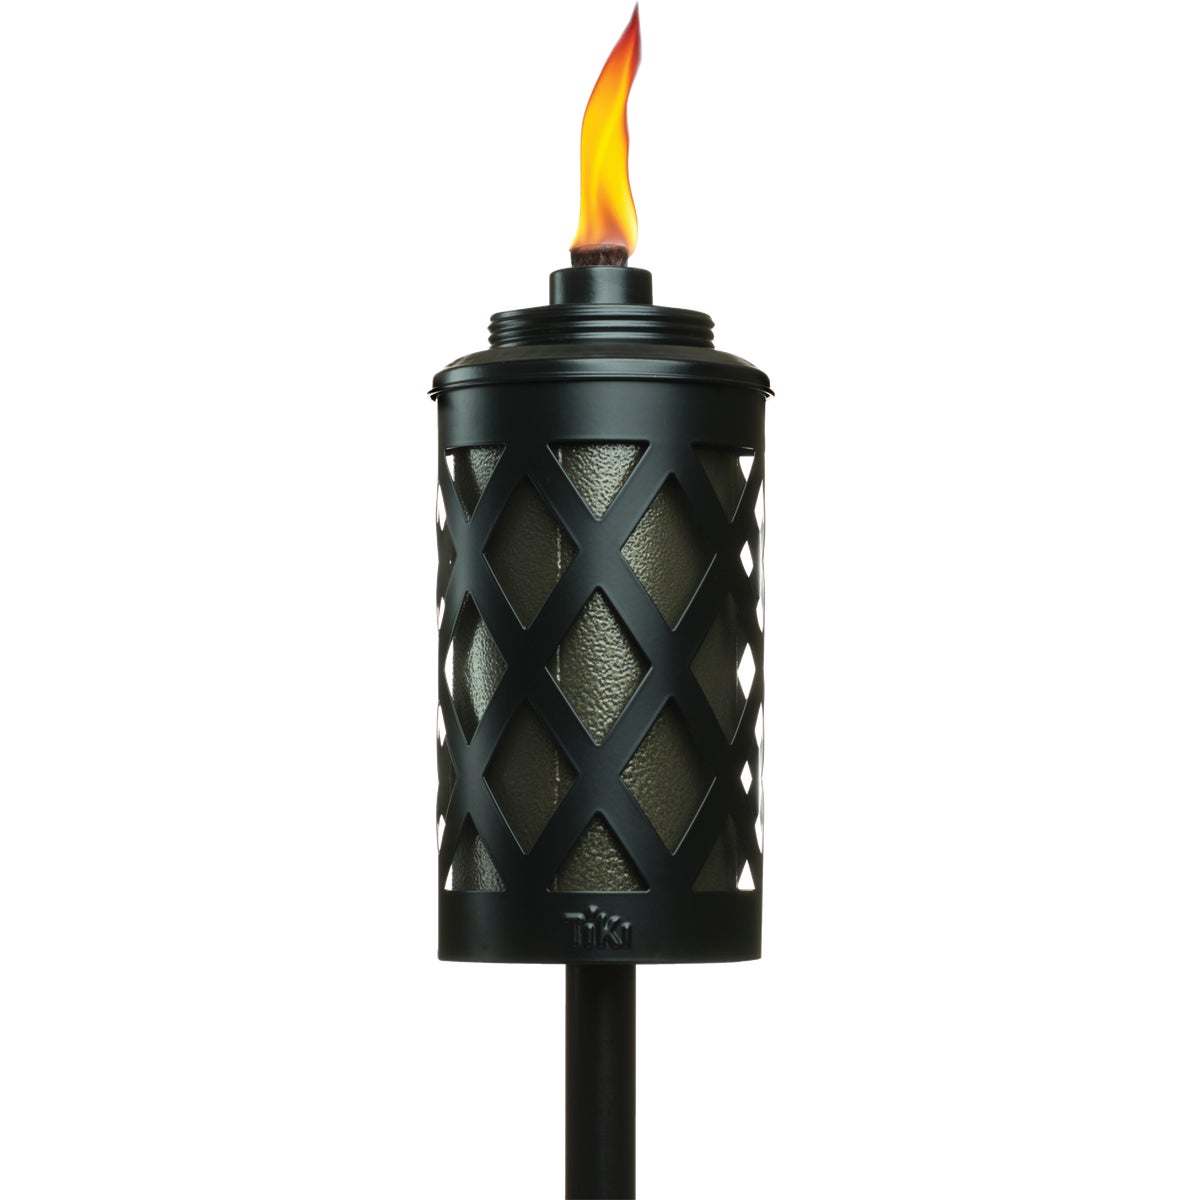 Item 800014, Urban metal patio torch gives natural light ambience and has a stylish 